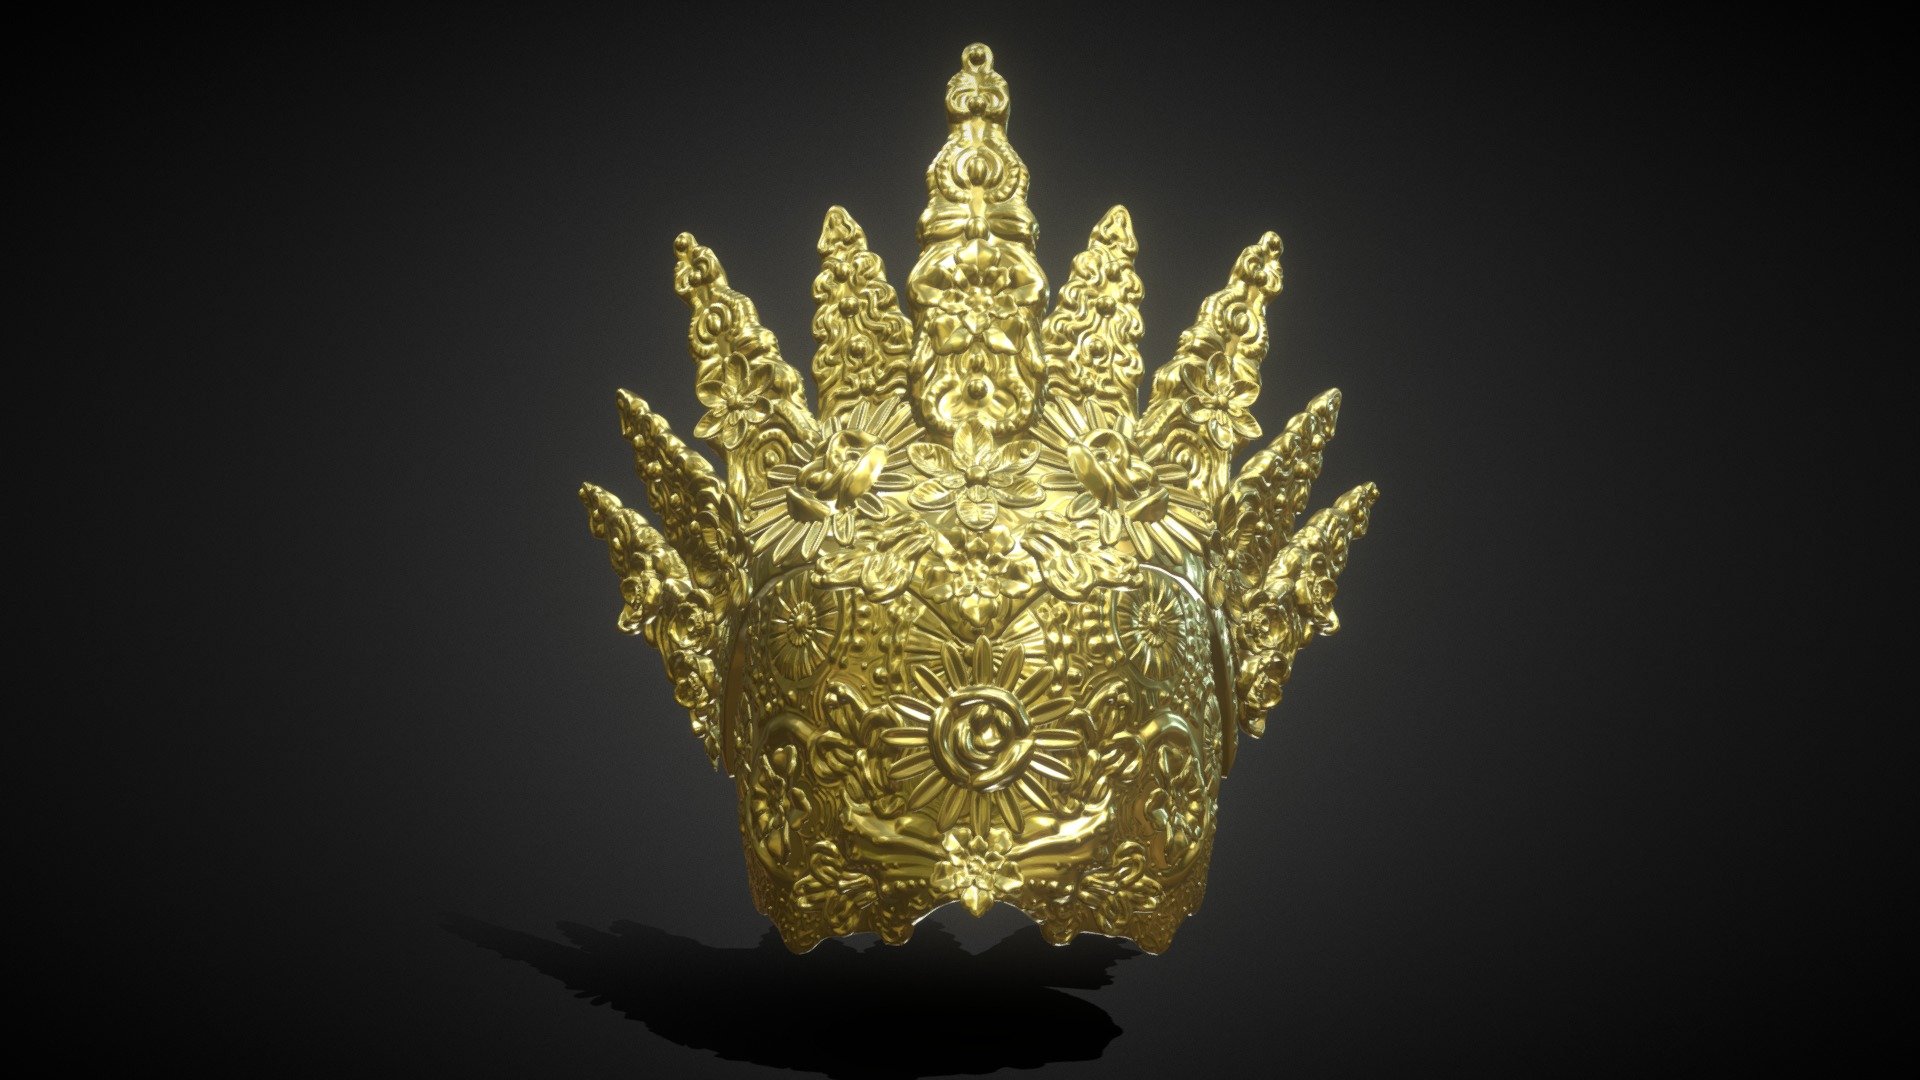 Natural Headpiece Mask inspired in some artworks ready for 3D Print I included the OBJ, STL, and ZBrush Tool files If you need 3D Game Assets or STL files I can do commission works 3d model